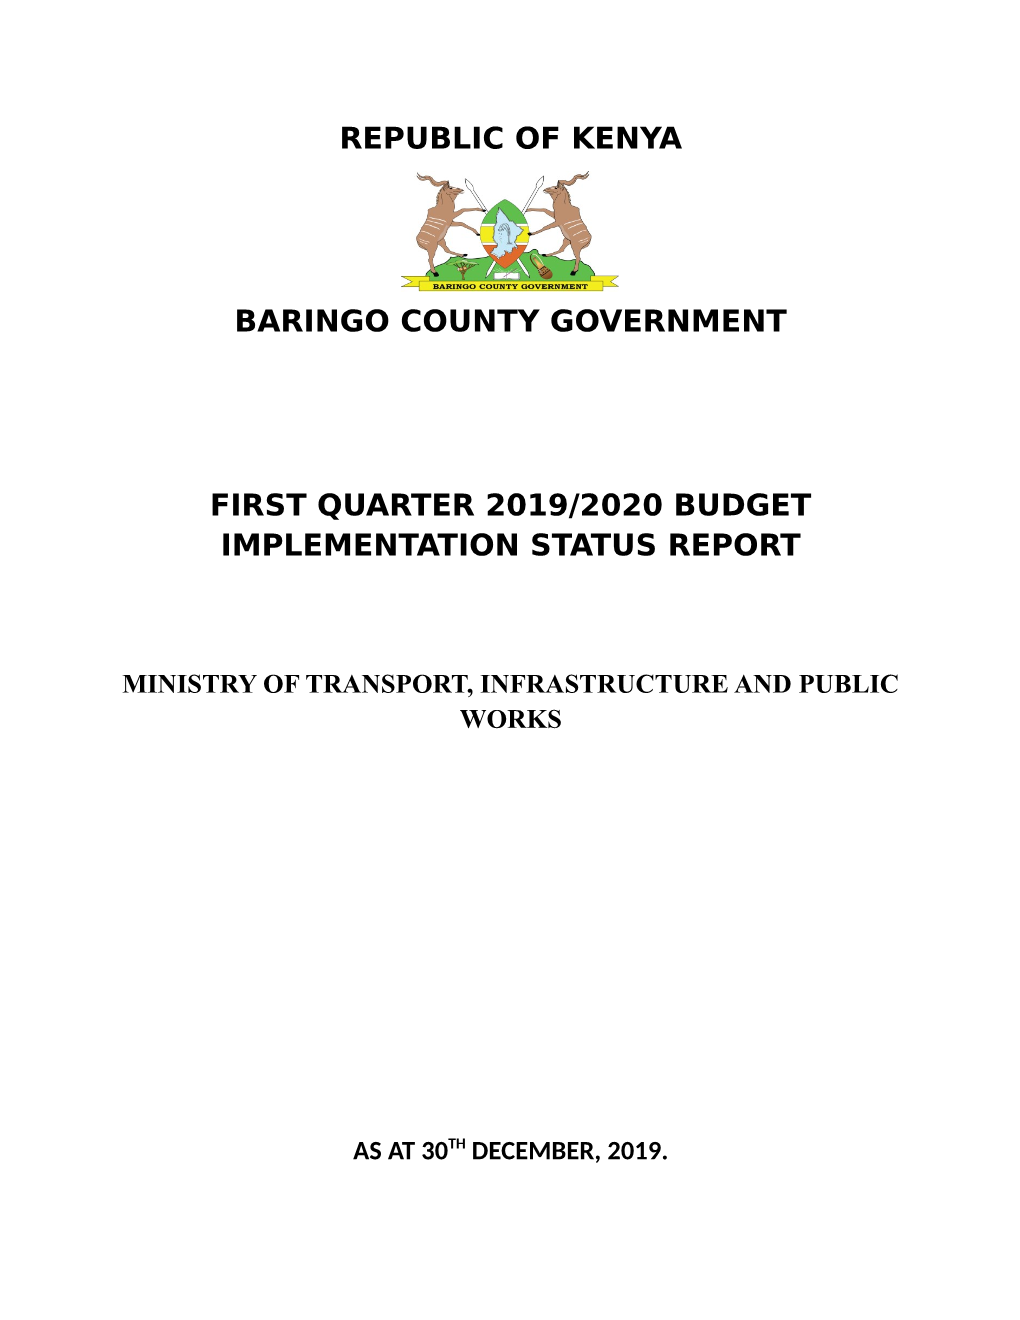 Republic of Kenya Baringo County Government First Quarter 2019/2020 Budget Implementation Status Report